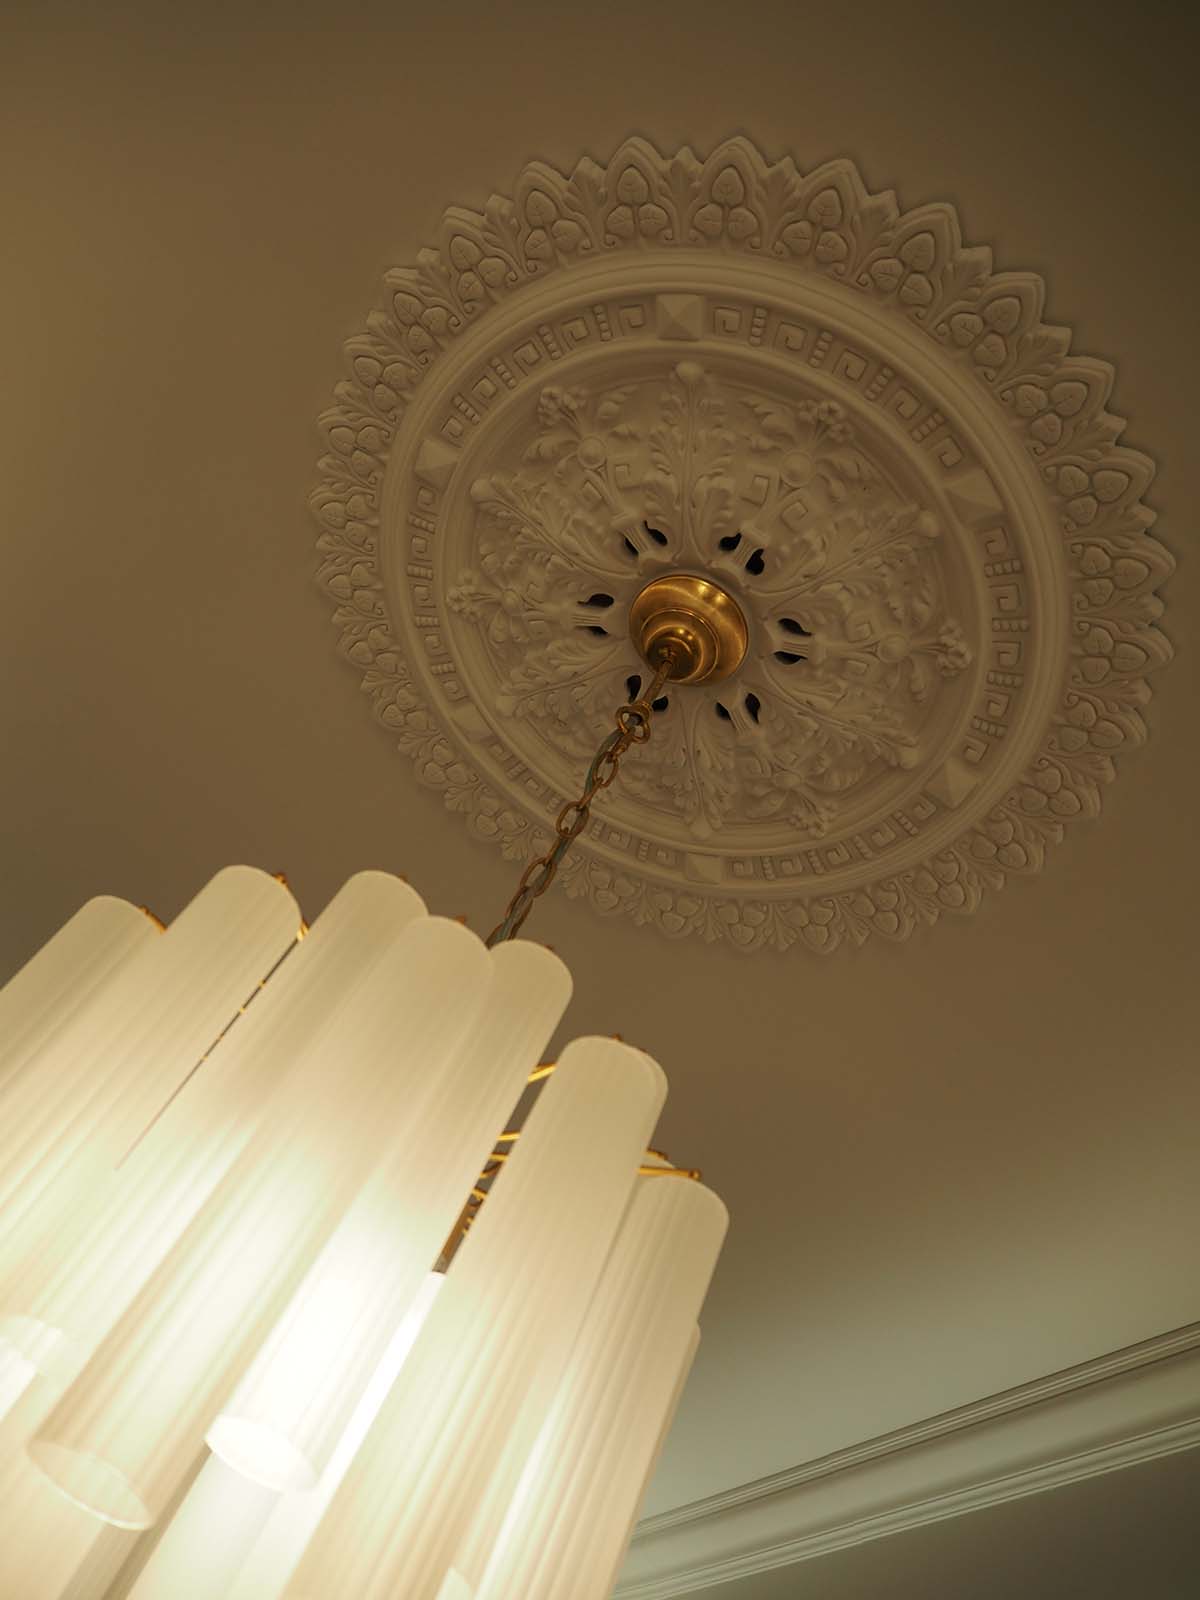 A close up of a light fitting and a ceiling rose